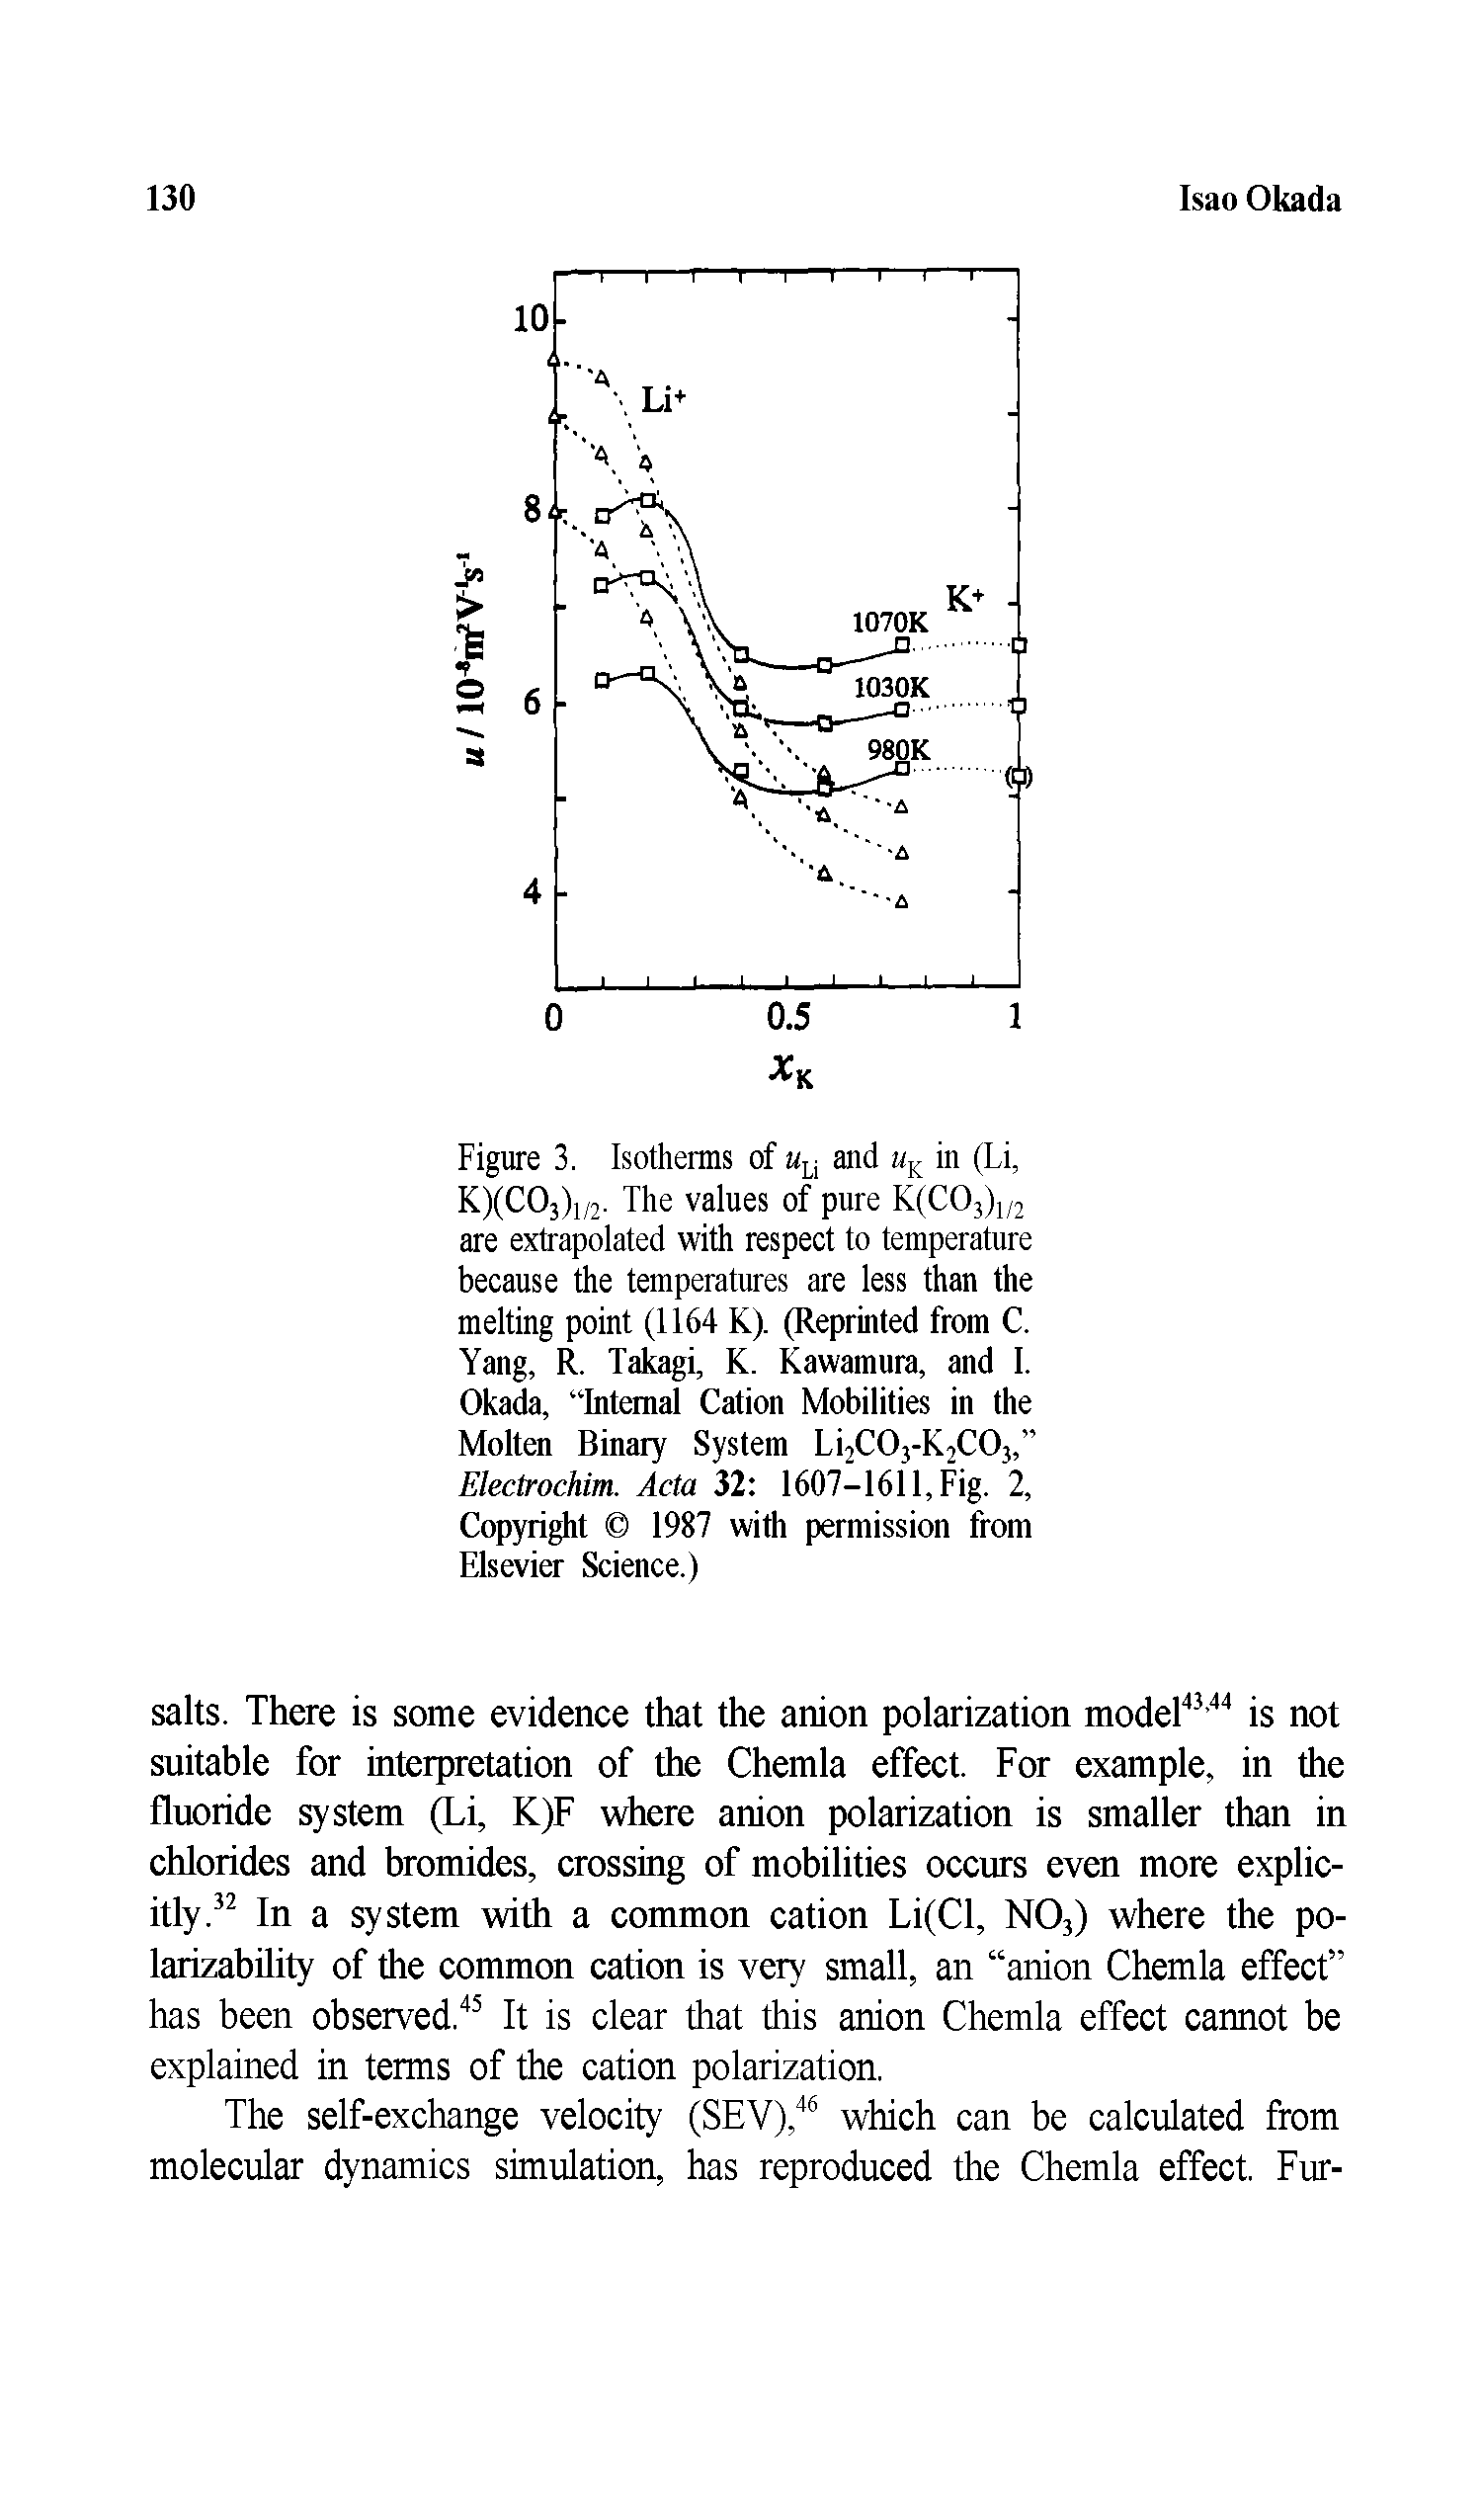 Figure 3. Isotherms of and in (Li, K)(C03)i/2. The values of pure K(C03)i/2 are extrapolated with respect to temperature because the temperatures are less than the melting point (1164 K). (Reprinted from C. Yang, R. Takagi, K. Kawamura, and I. Okada, Internal Cation Mobilities in the Molten Binary System Li2C03-K2C03, Electrochim. Acta 32 1607-1611, Fig. 2, Copyright 1987 with permission from Elsevier Science.)...